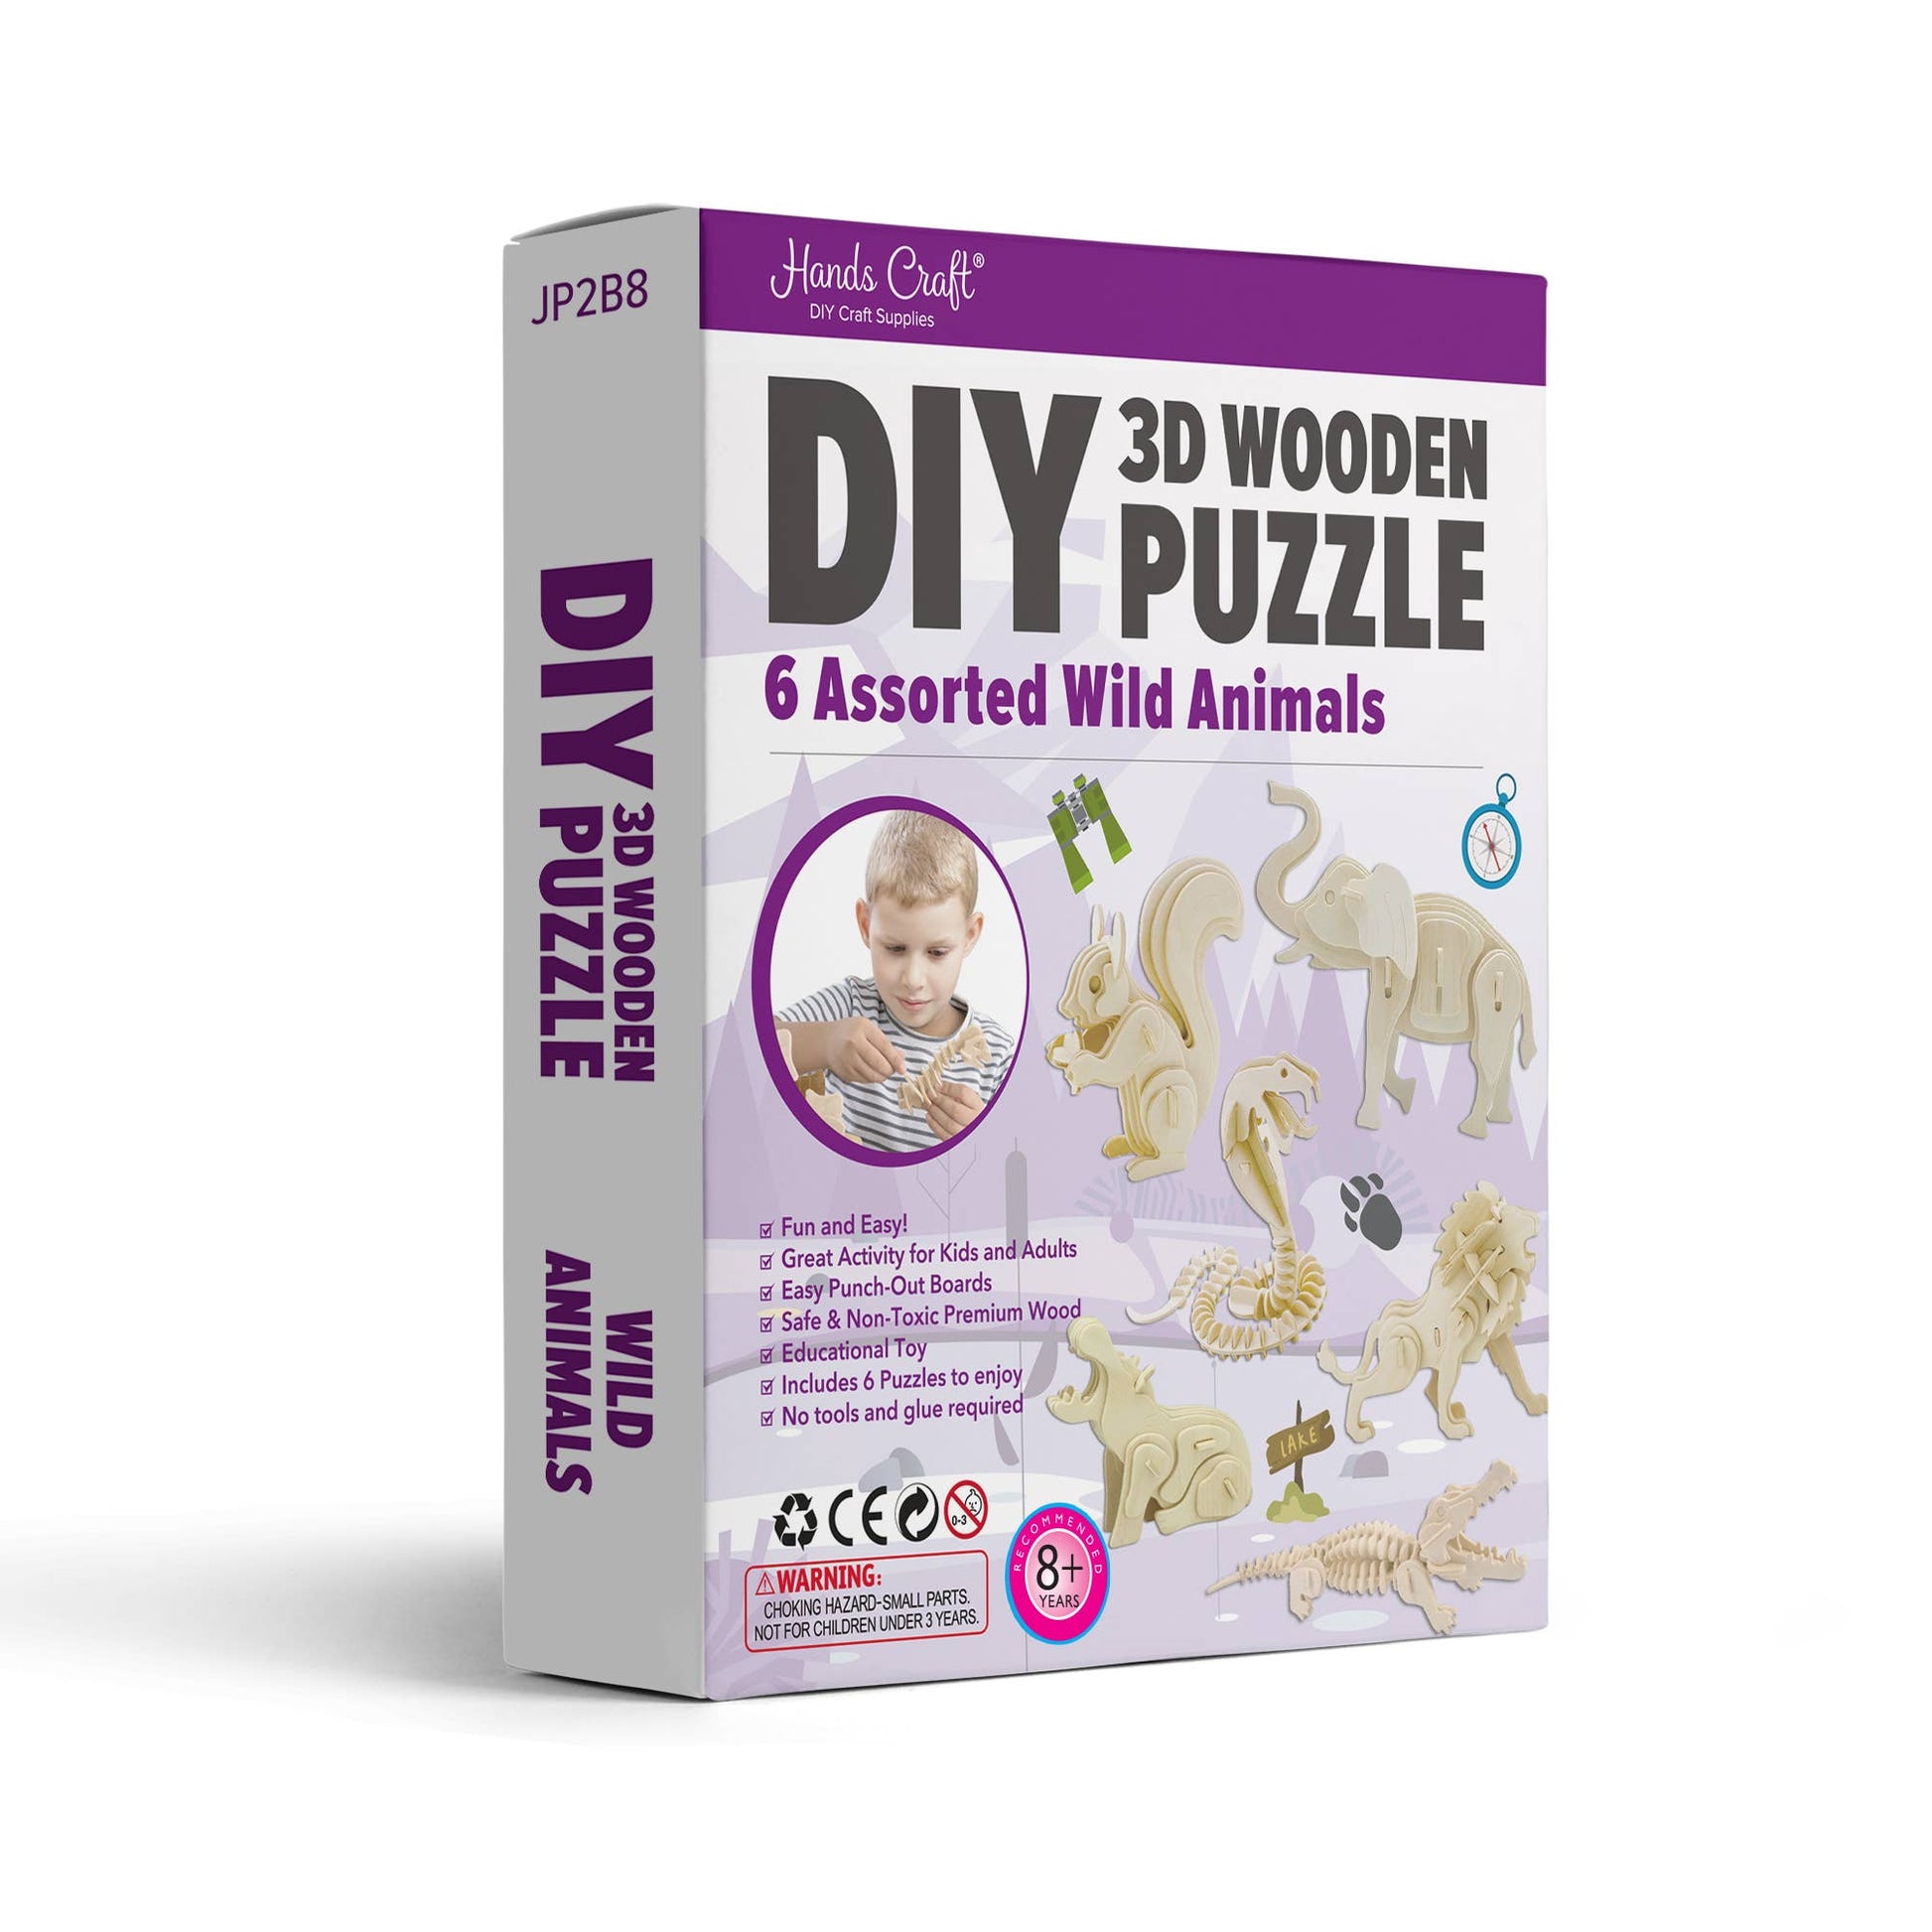 How to Glue a Wooden Puzzle ?